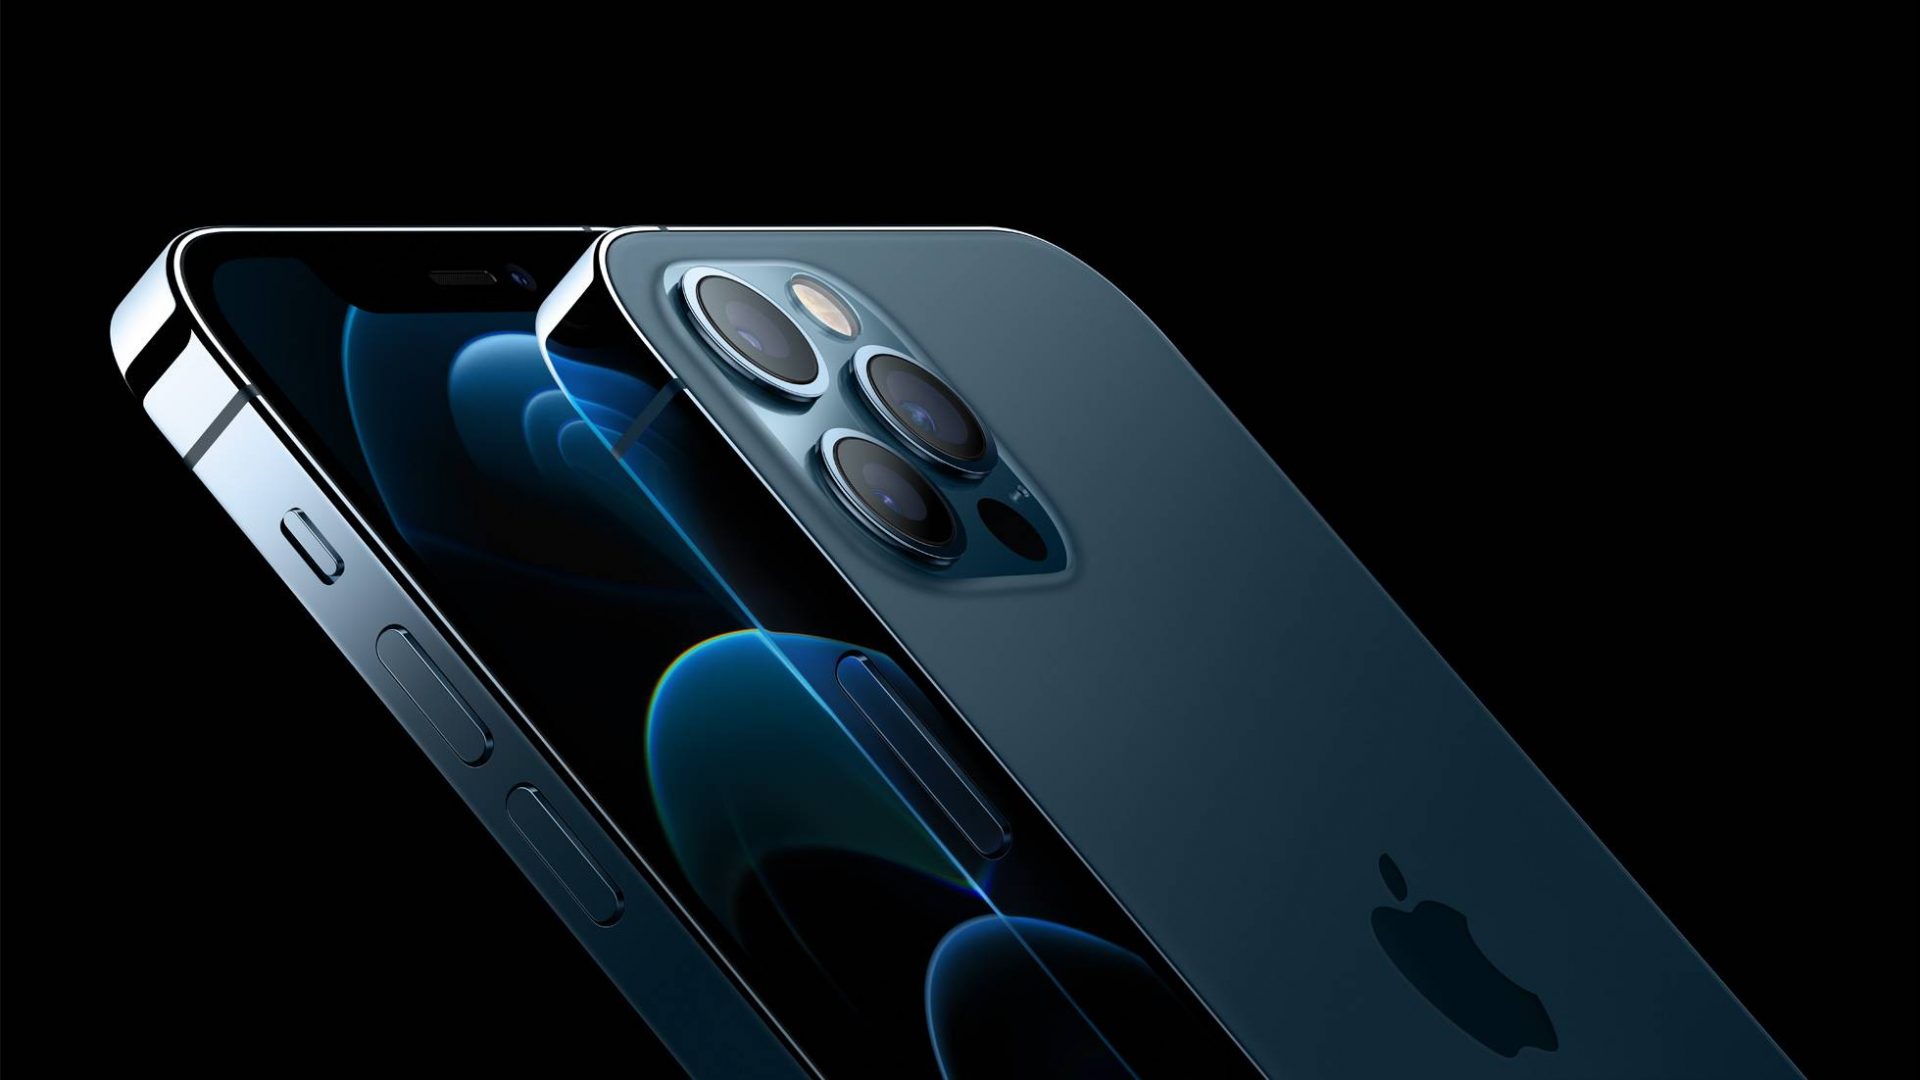 Don’t freak out about this unusual iPhone 12 Pro Max revelation